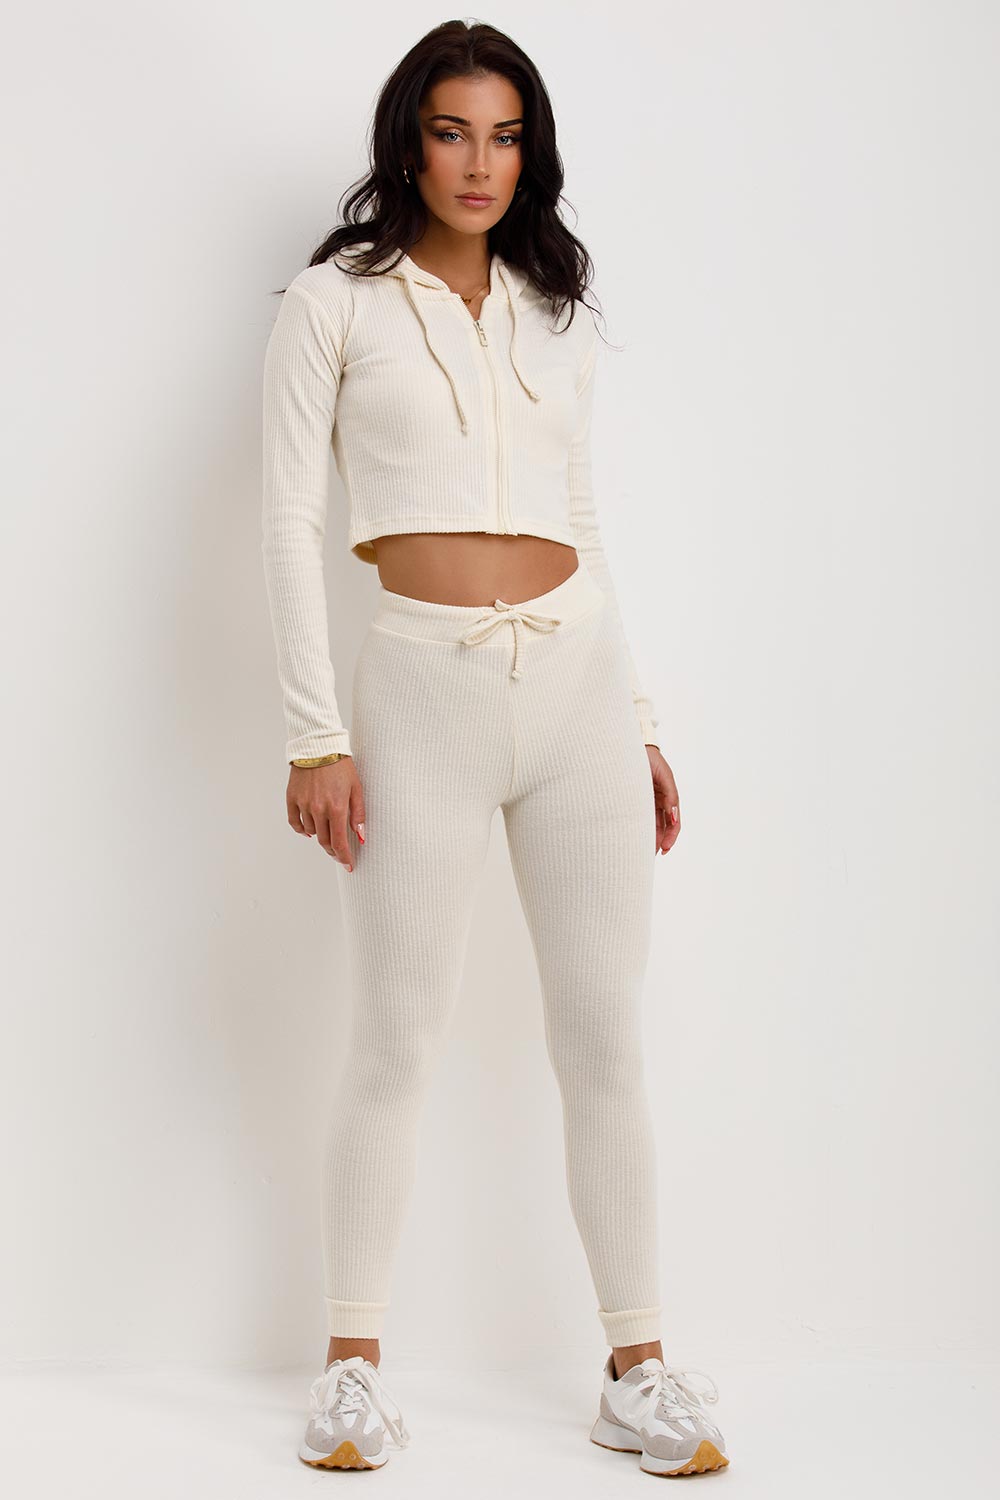 Cream Ribbed Leggings, Two Piece Sets